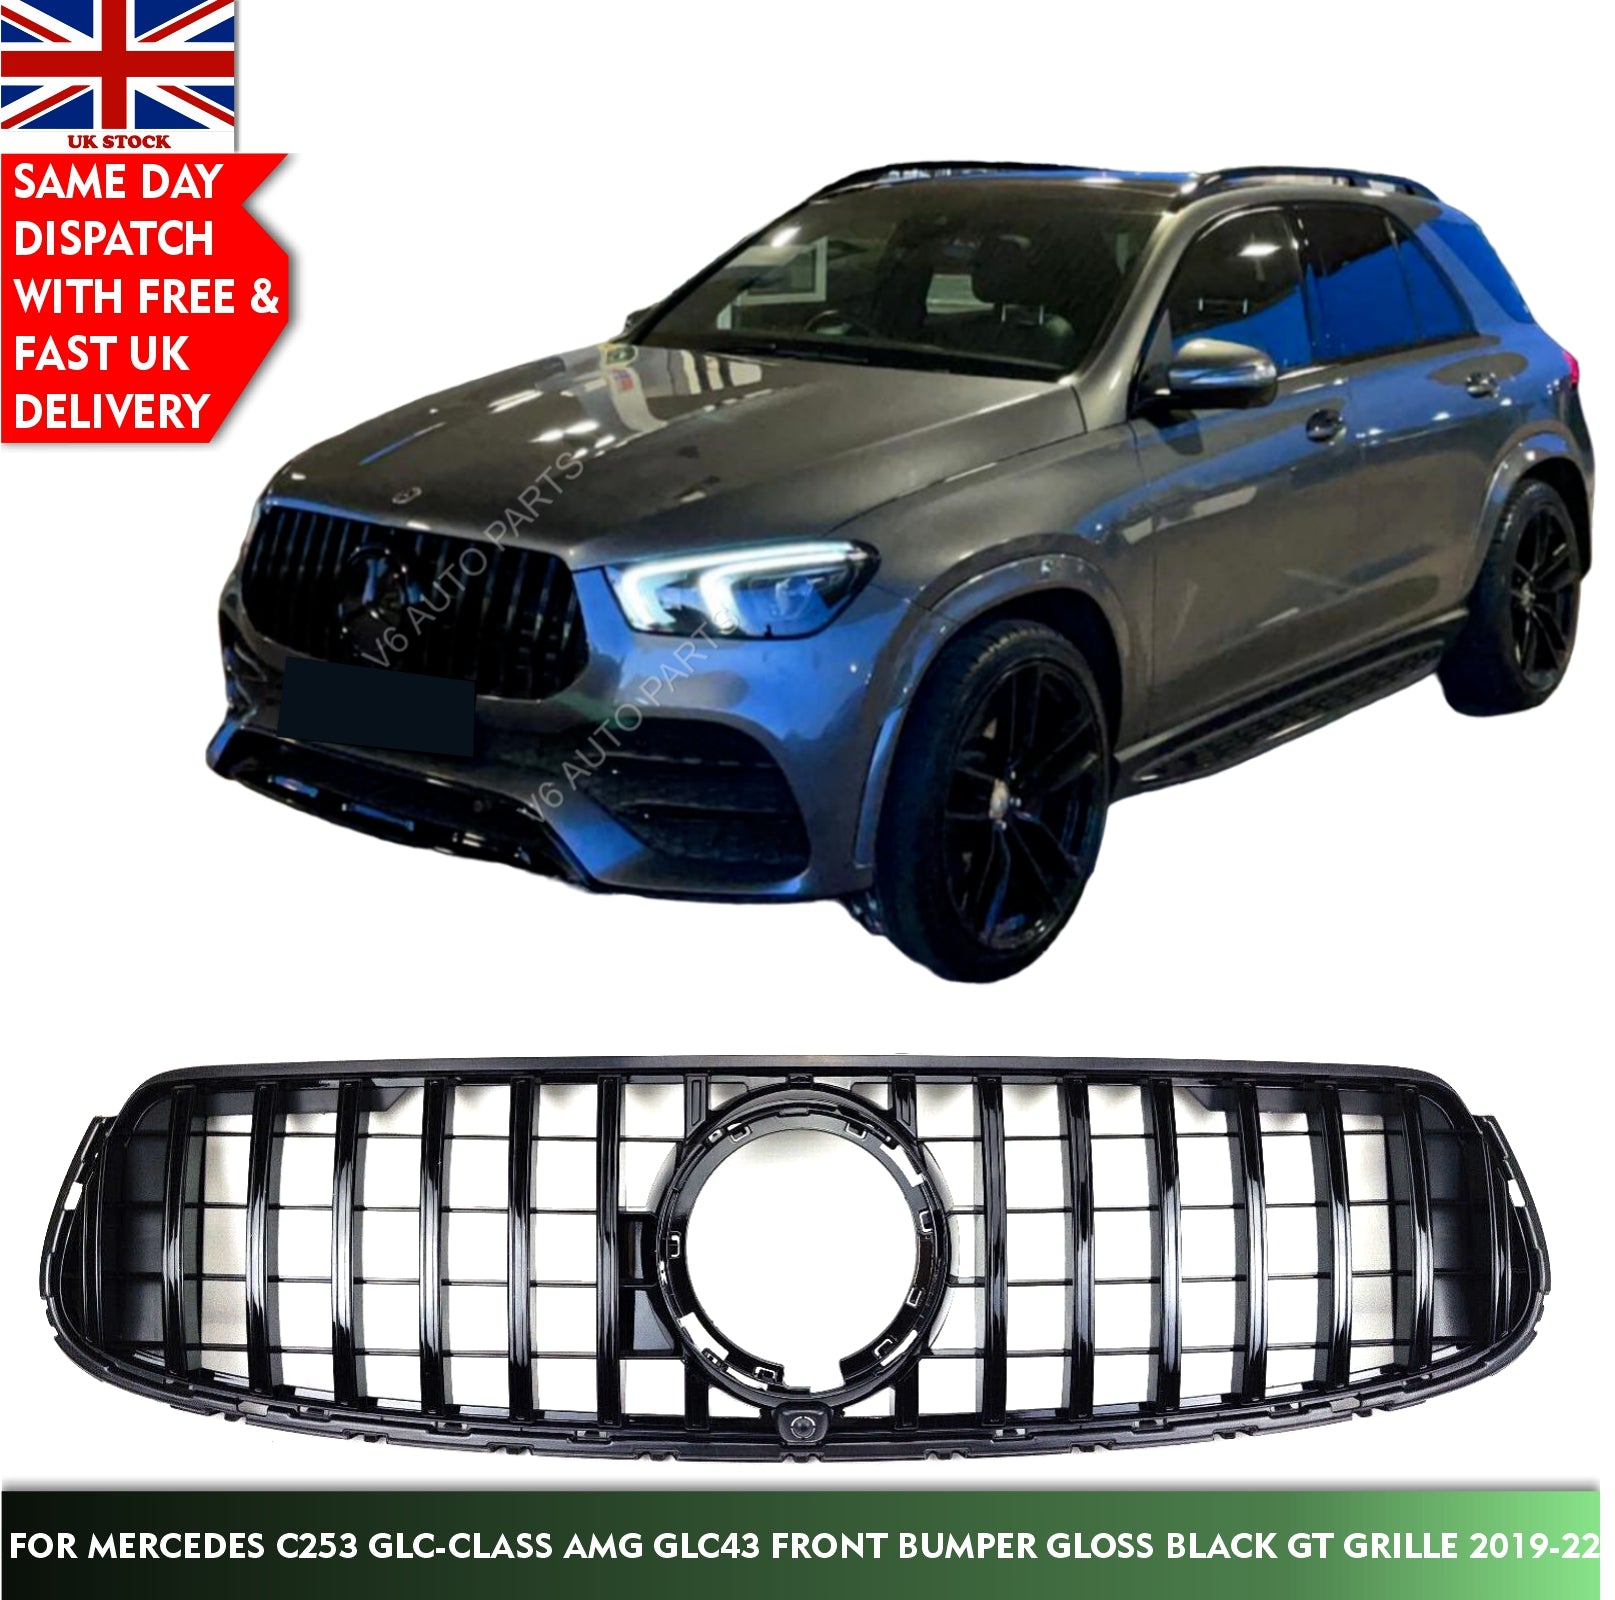 For Mercedes C253 GLC-Class AMG GLC43 Front Bumper Gloss Black GT Grille 2019-22